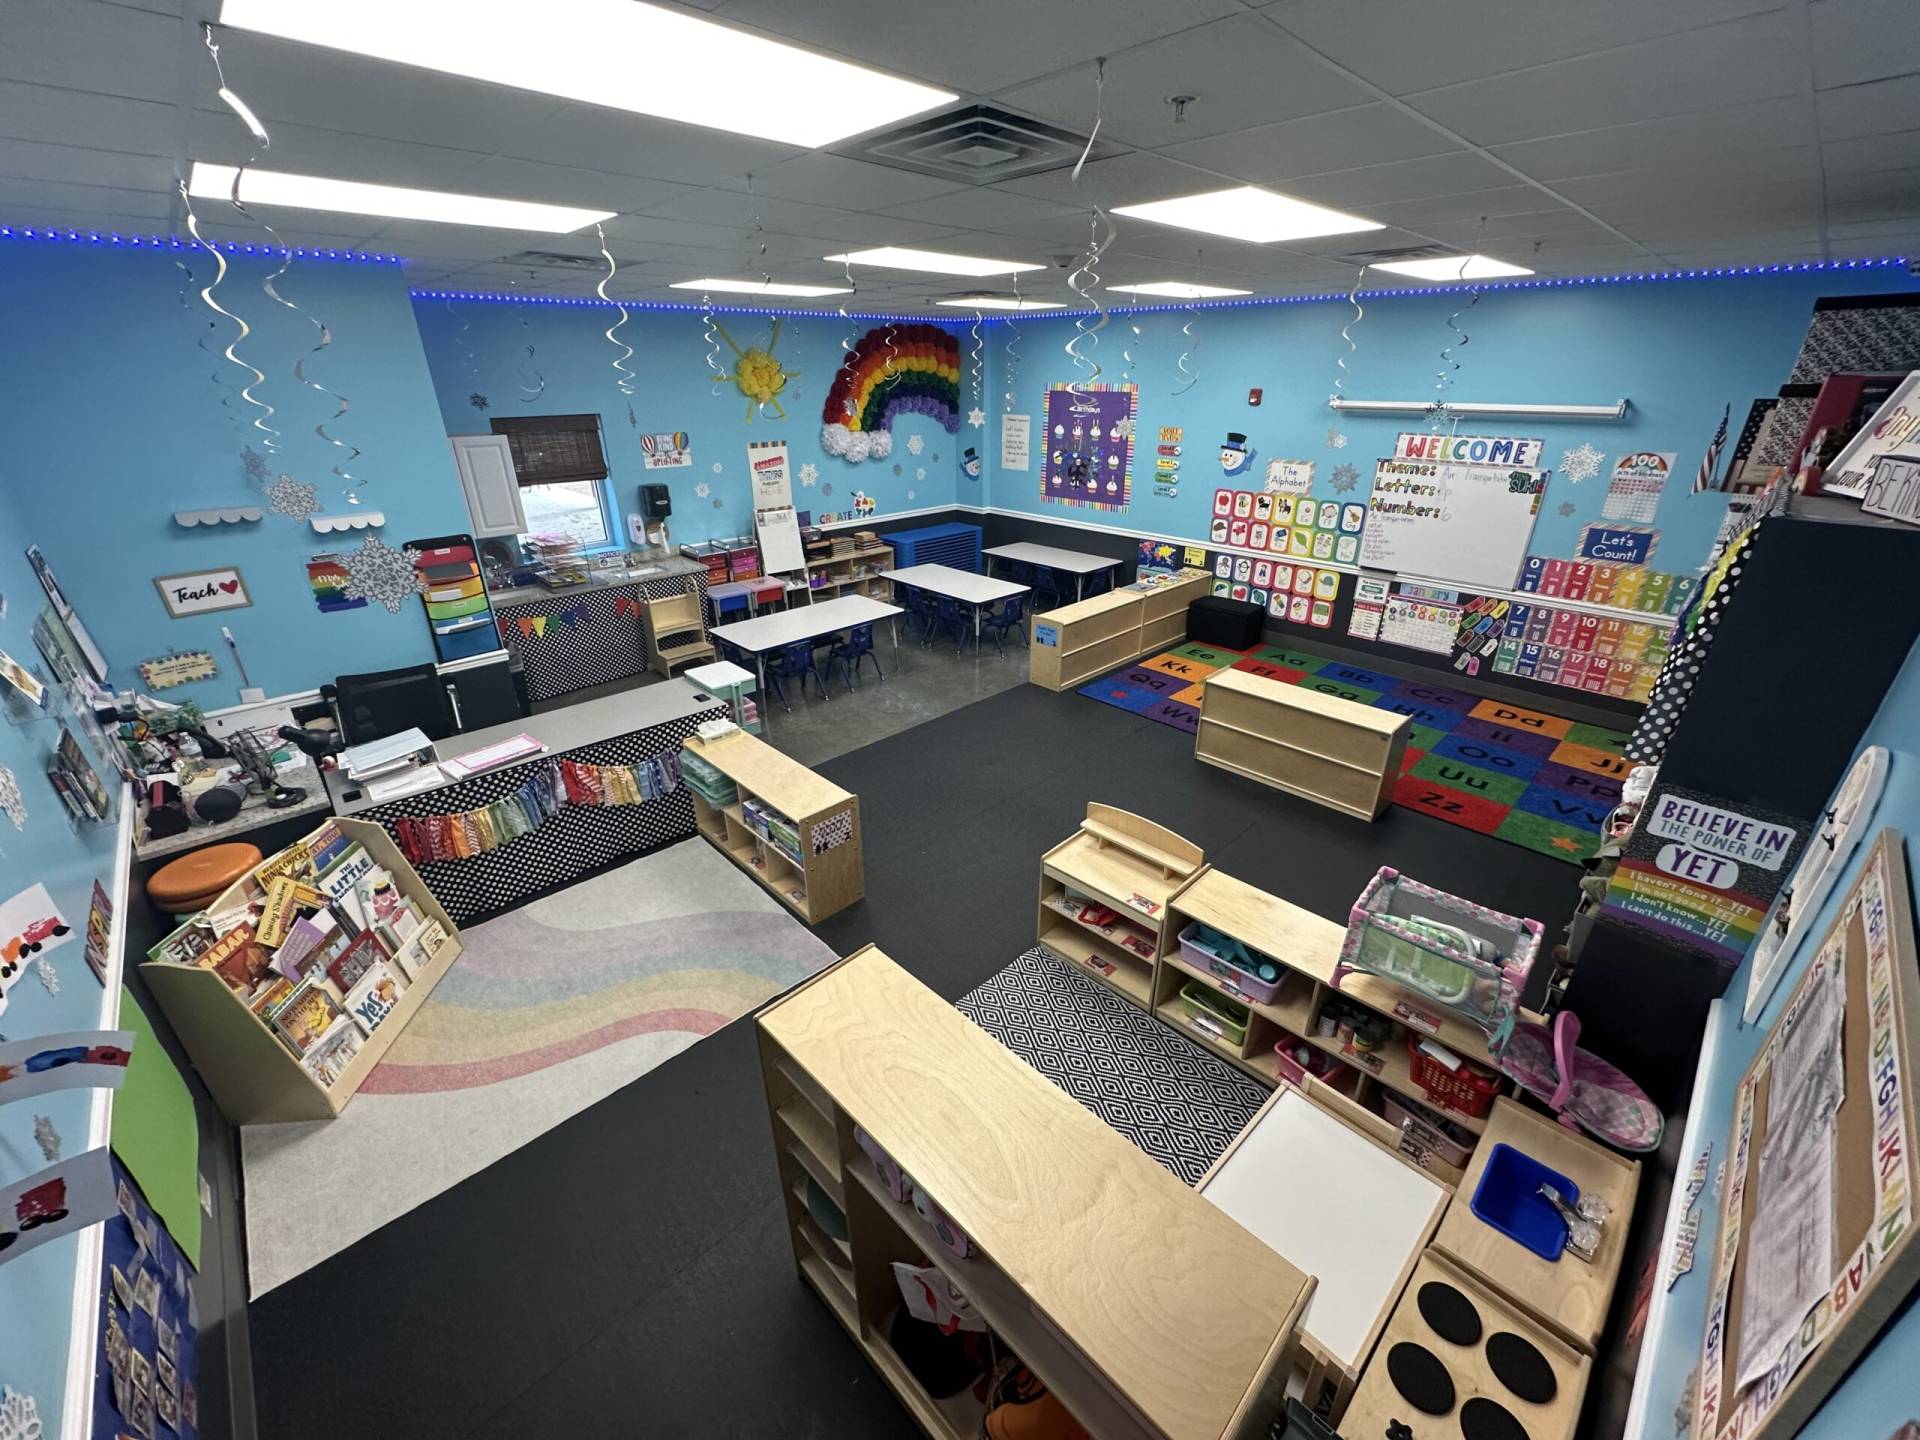 A bright and colorful preschool classroom, filled with small, child-sized furniture. The room features a variety of learning stations, including a reading corner with a small bookshelf stocked with picture books, a play area with educational toys, and an arts and crafts table covered with paper, crayons, and paints. The walls are decorated with children's artwork and educational posters showcasing the alphabet, numbers, and basic shapes. Natural light streams in from large windows, and a cozy rug lies in the center of the room for group activities. The atmosphere is cheerful and inviting, designed to stimulate learning and creativity in young children.